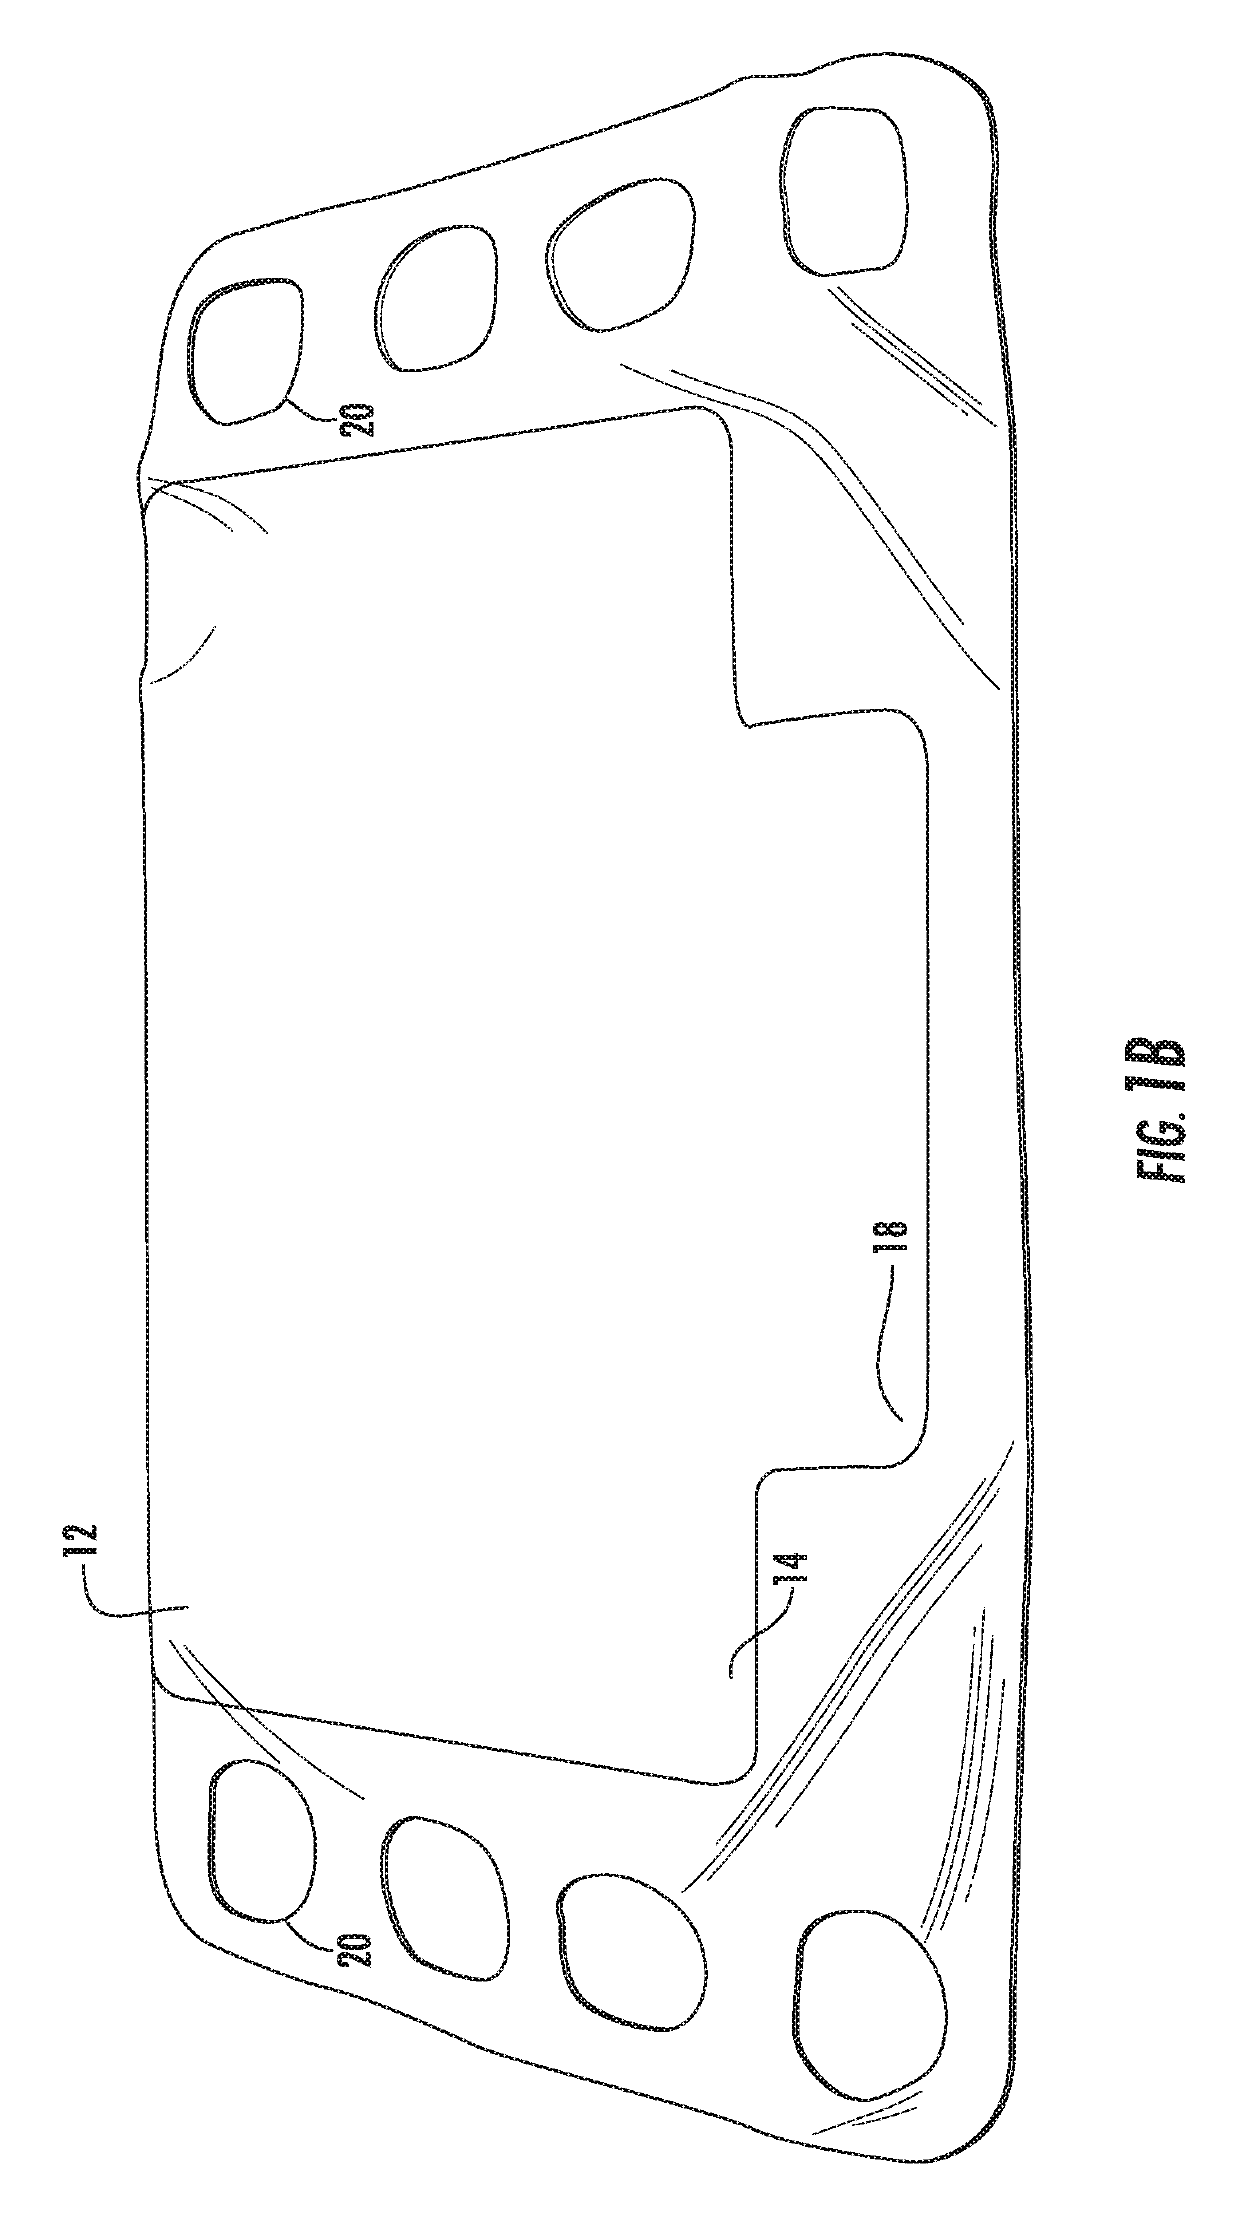 System and method for off-loading of the body in the prone position and for patient turning and repositioning